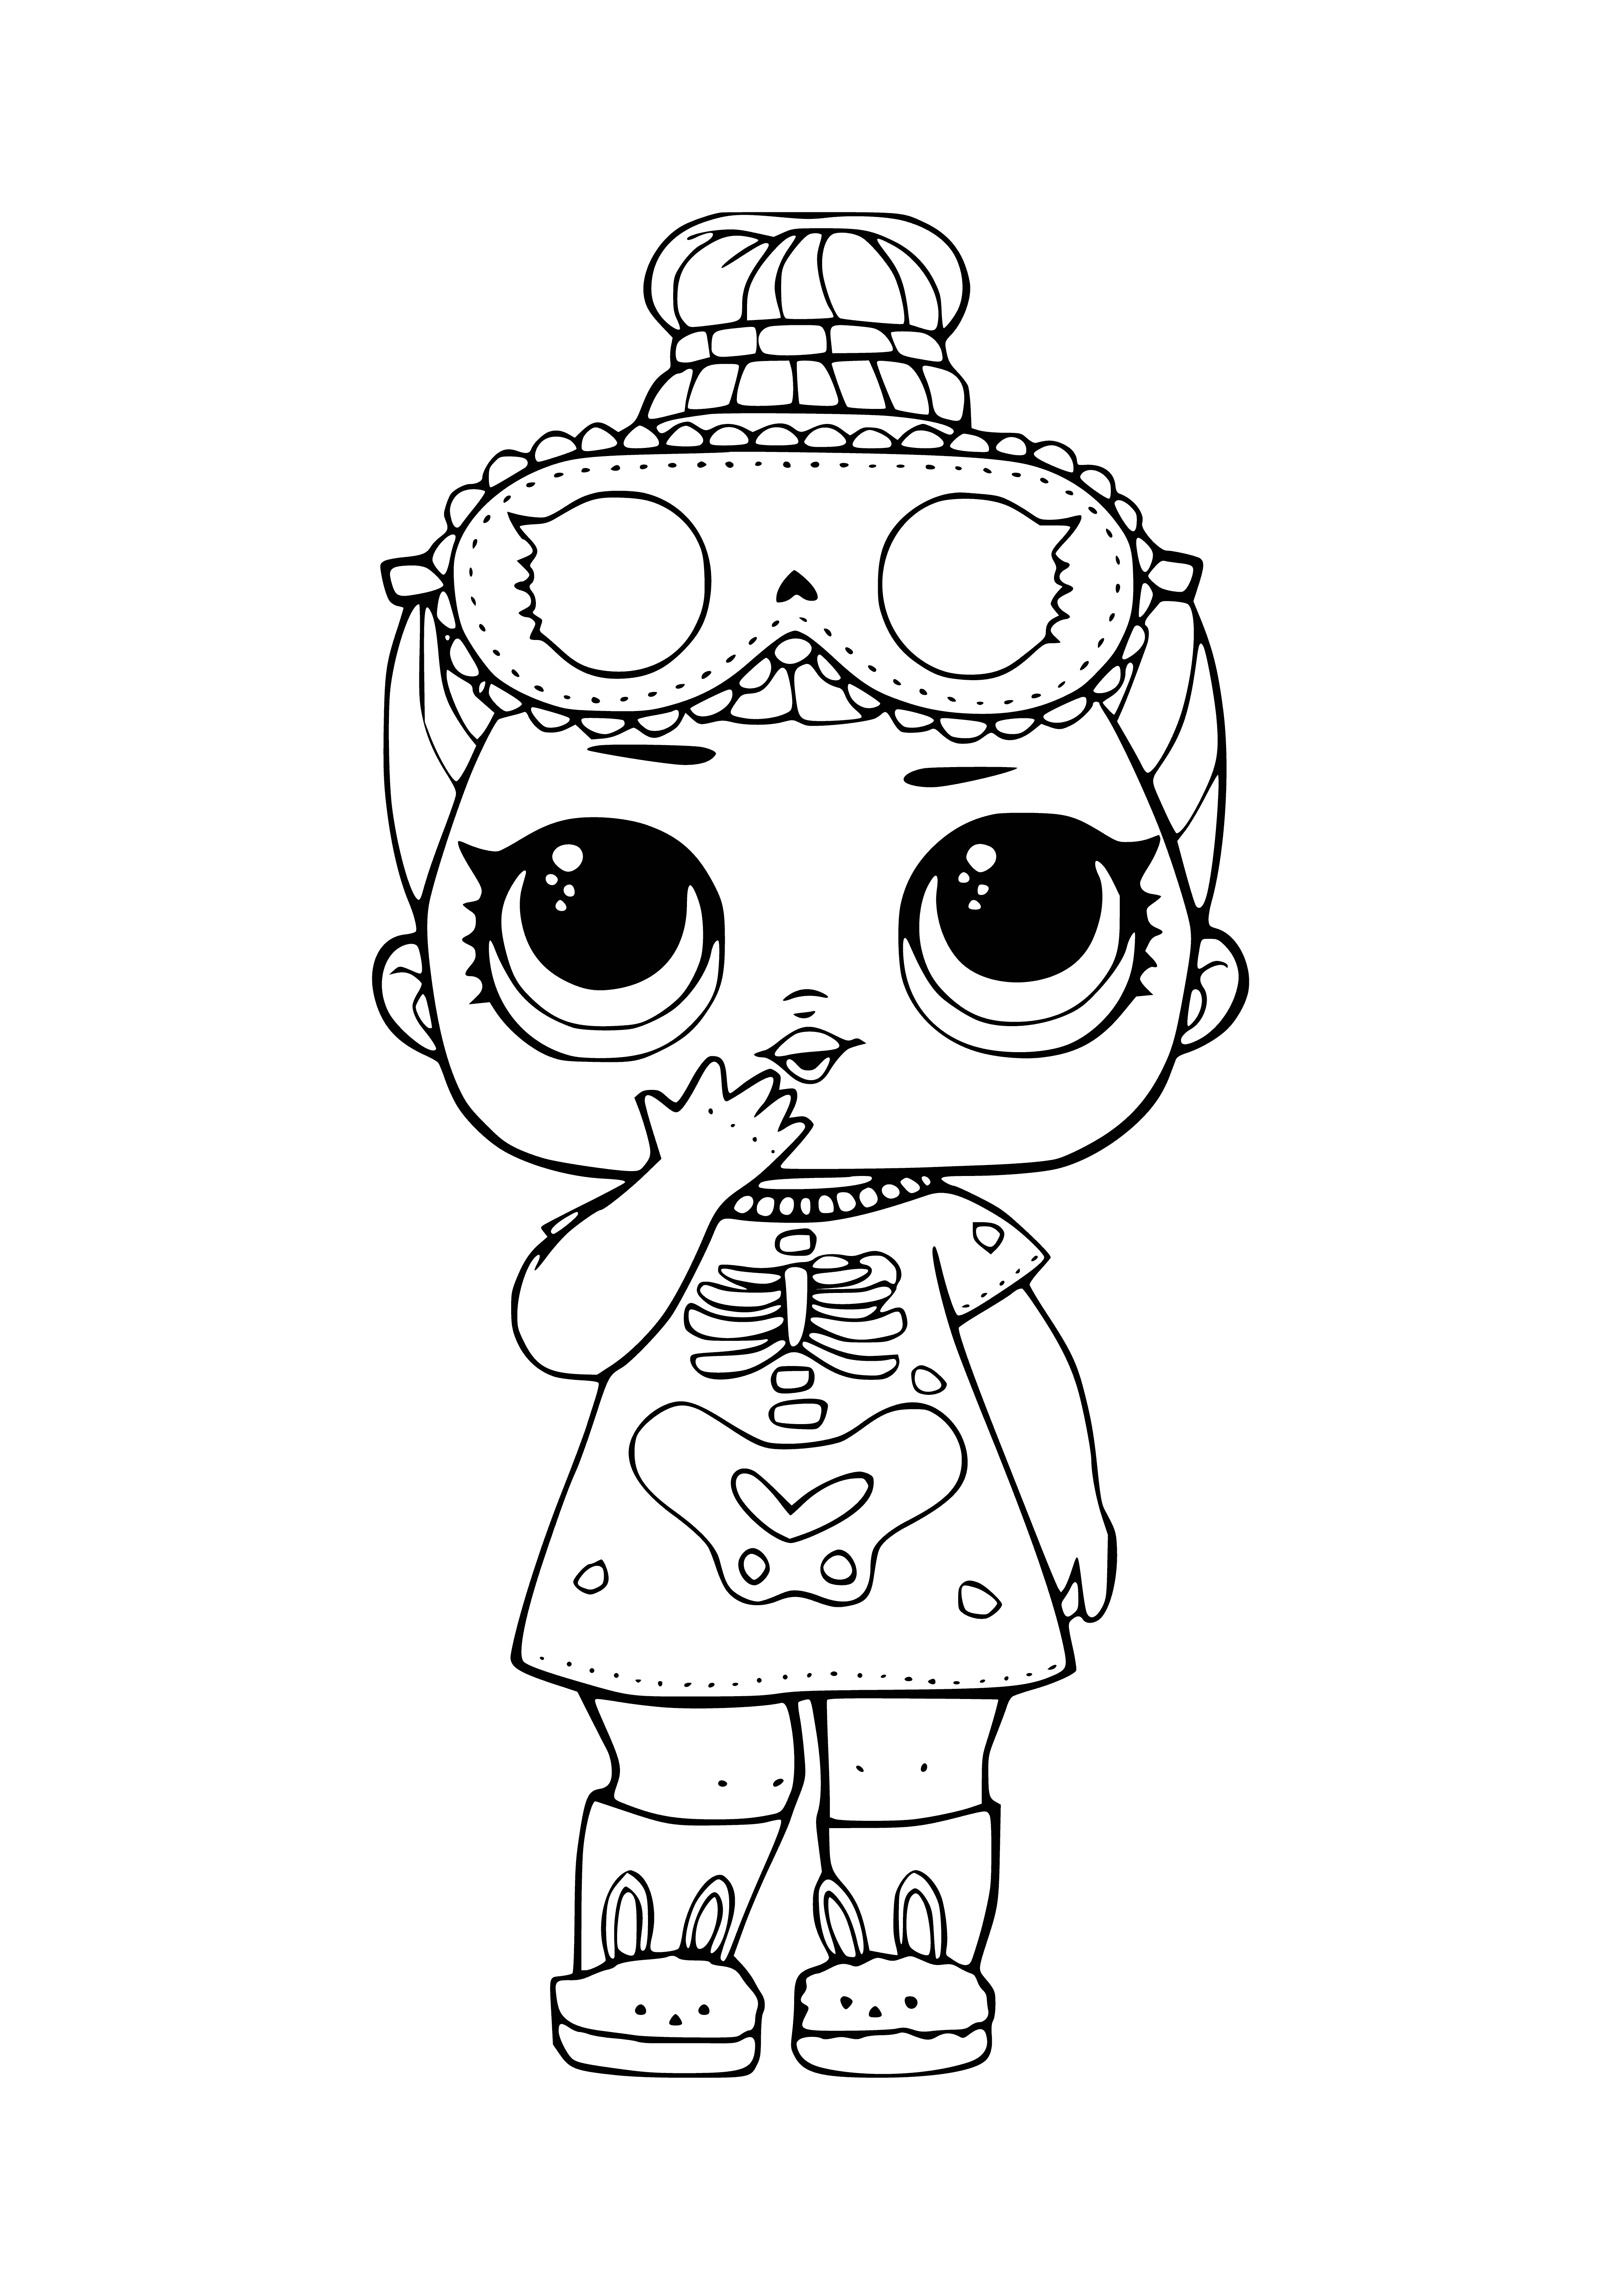 coloring page: Pop with skeleton on front wearing blue shirt and bowtie, yellow body, white arms, legs holding blue confetti pop.